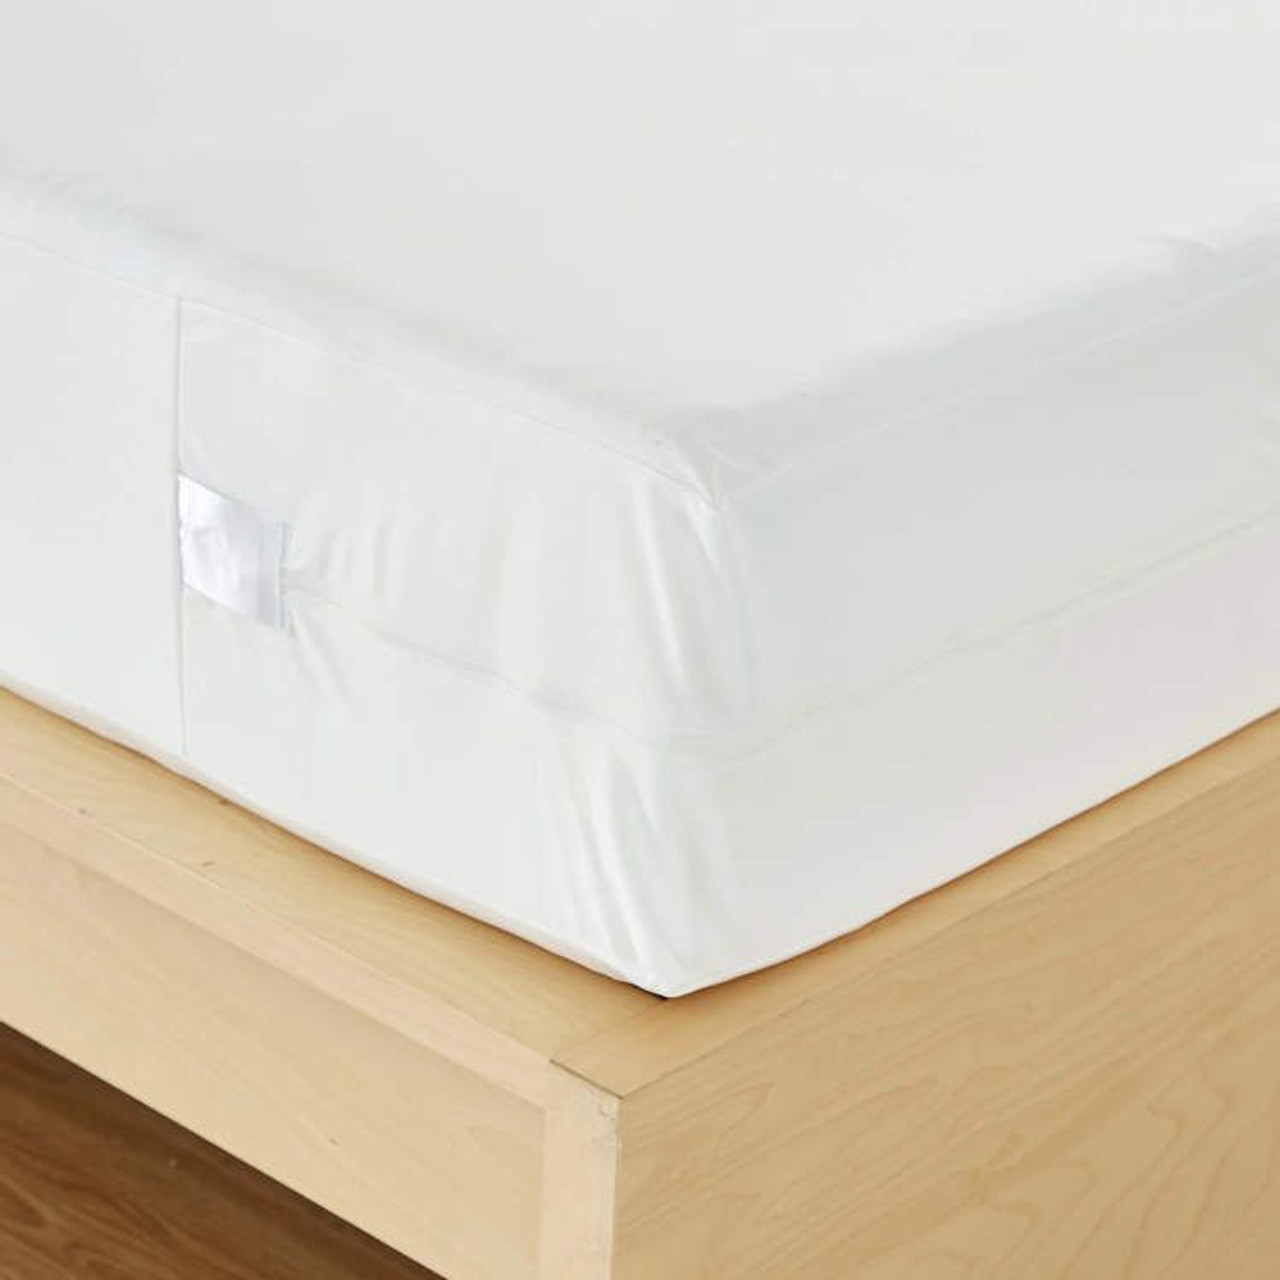 The Bedbug Solution Elite Zippered up to 9 Inch Deep, KING 78x80-9  MATTRESS and BOX Spring Cover, Waterproof, Each